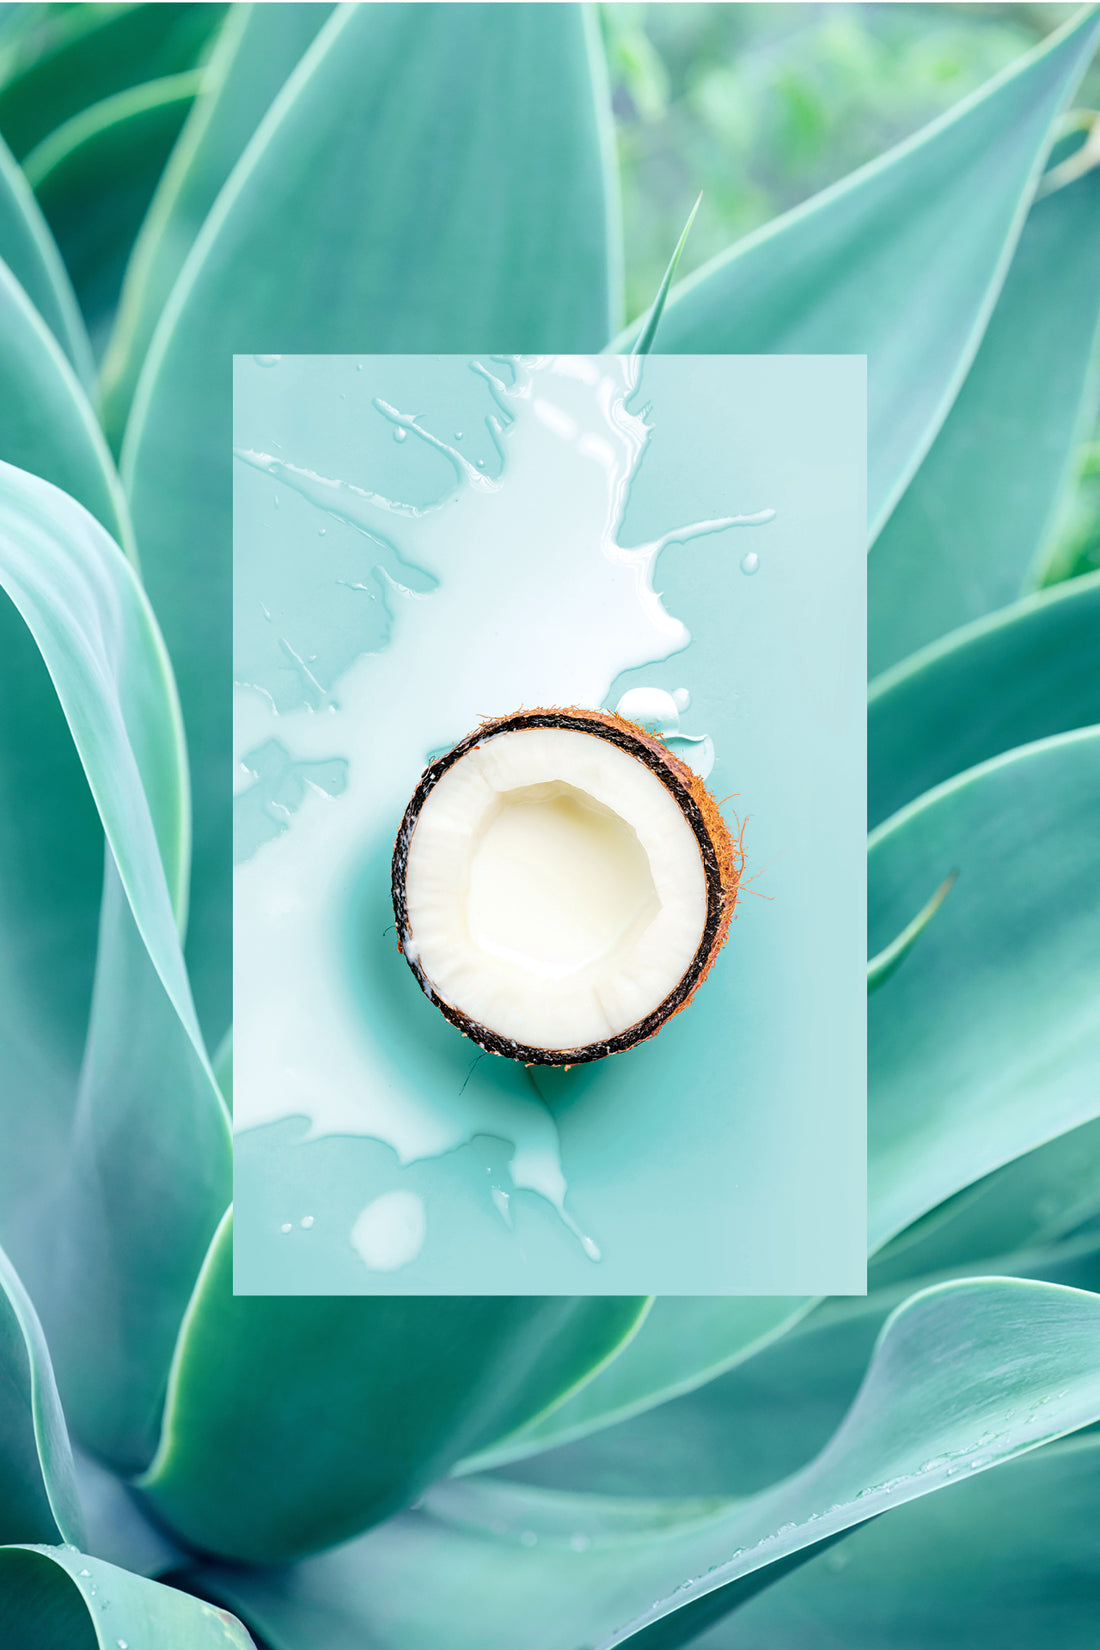 Ingredient Image of Coconut Milk and Agave